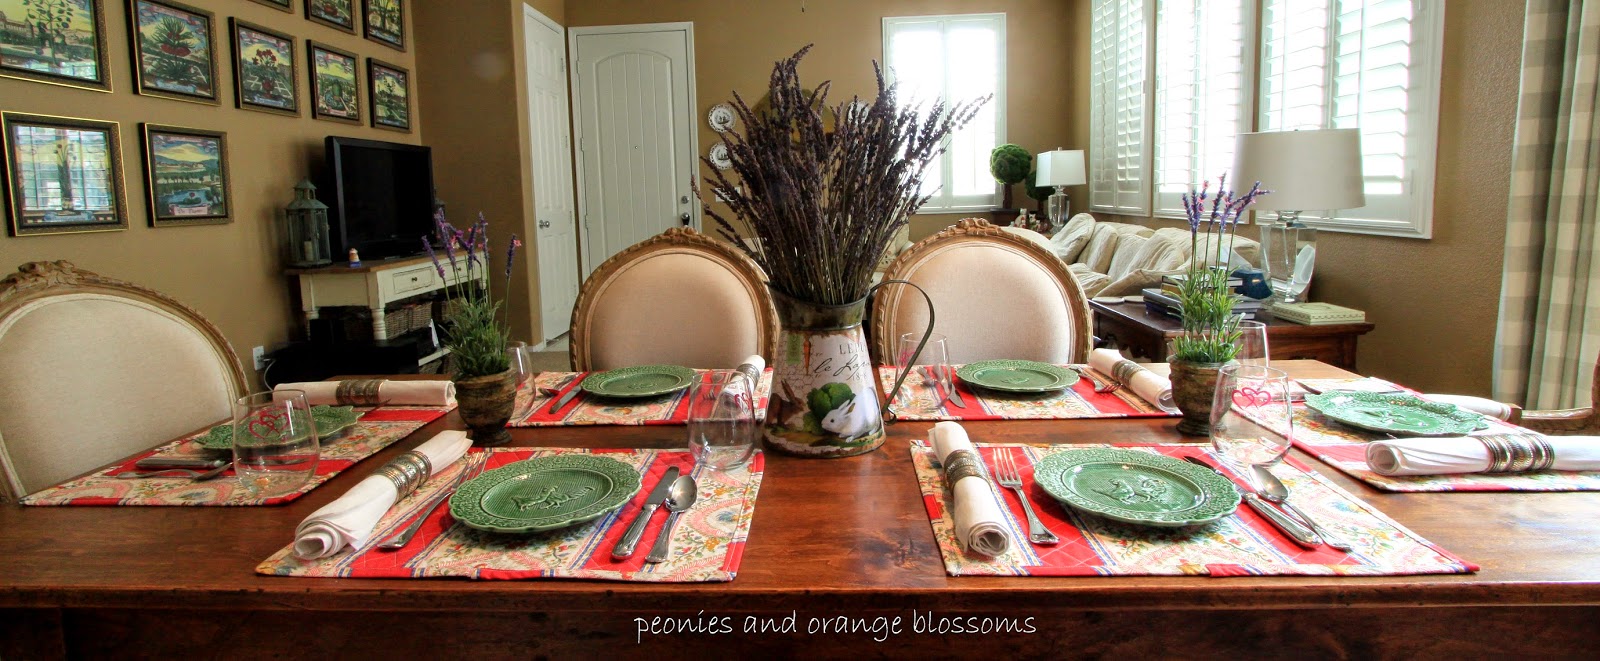 French country table with French rooster placemats, lavender, and green plates - Peonies and Orange Blossoms